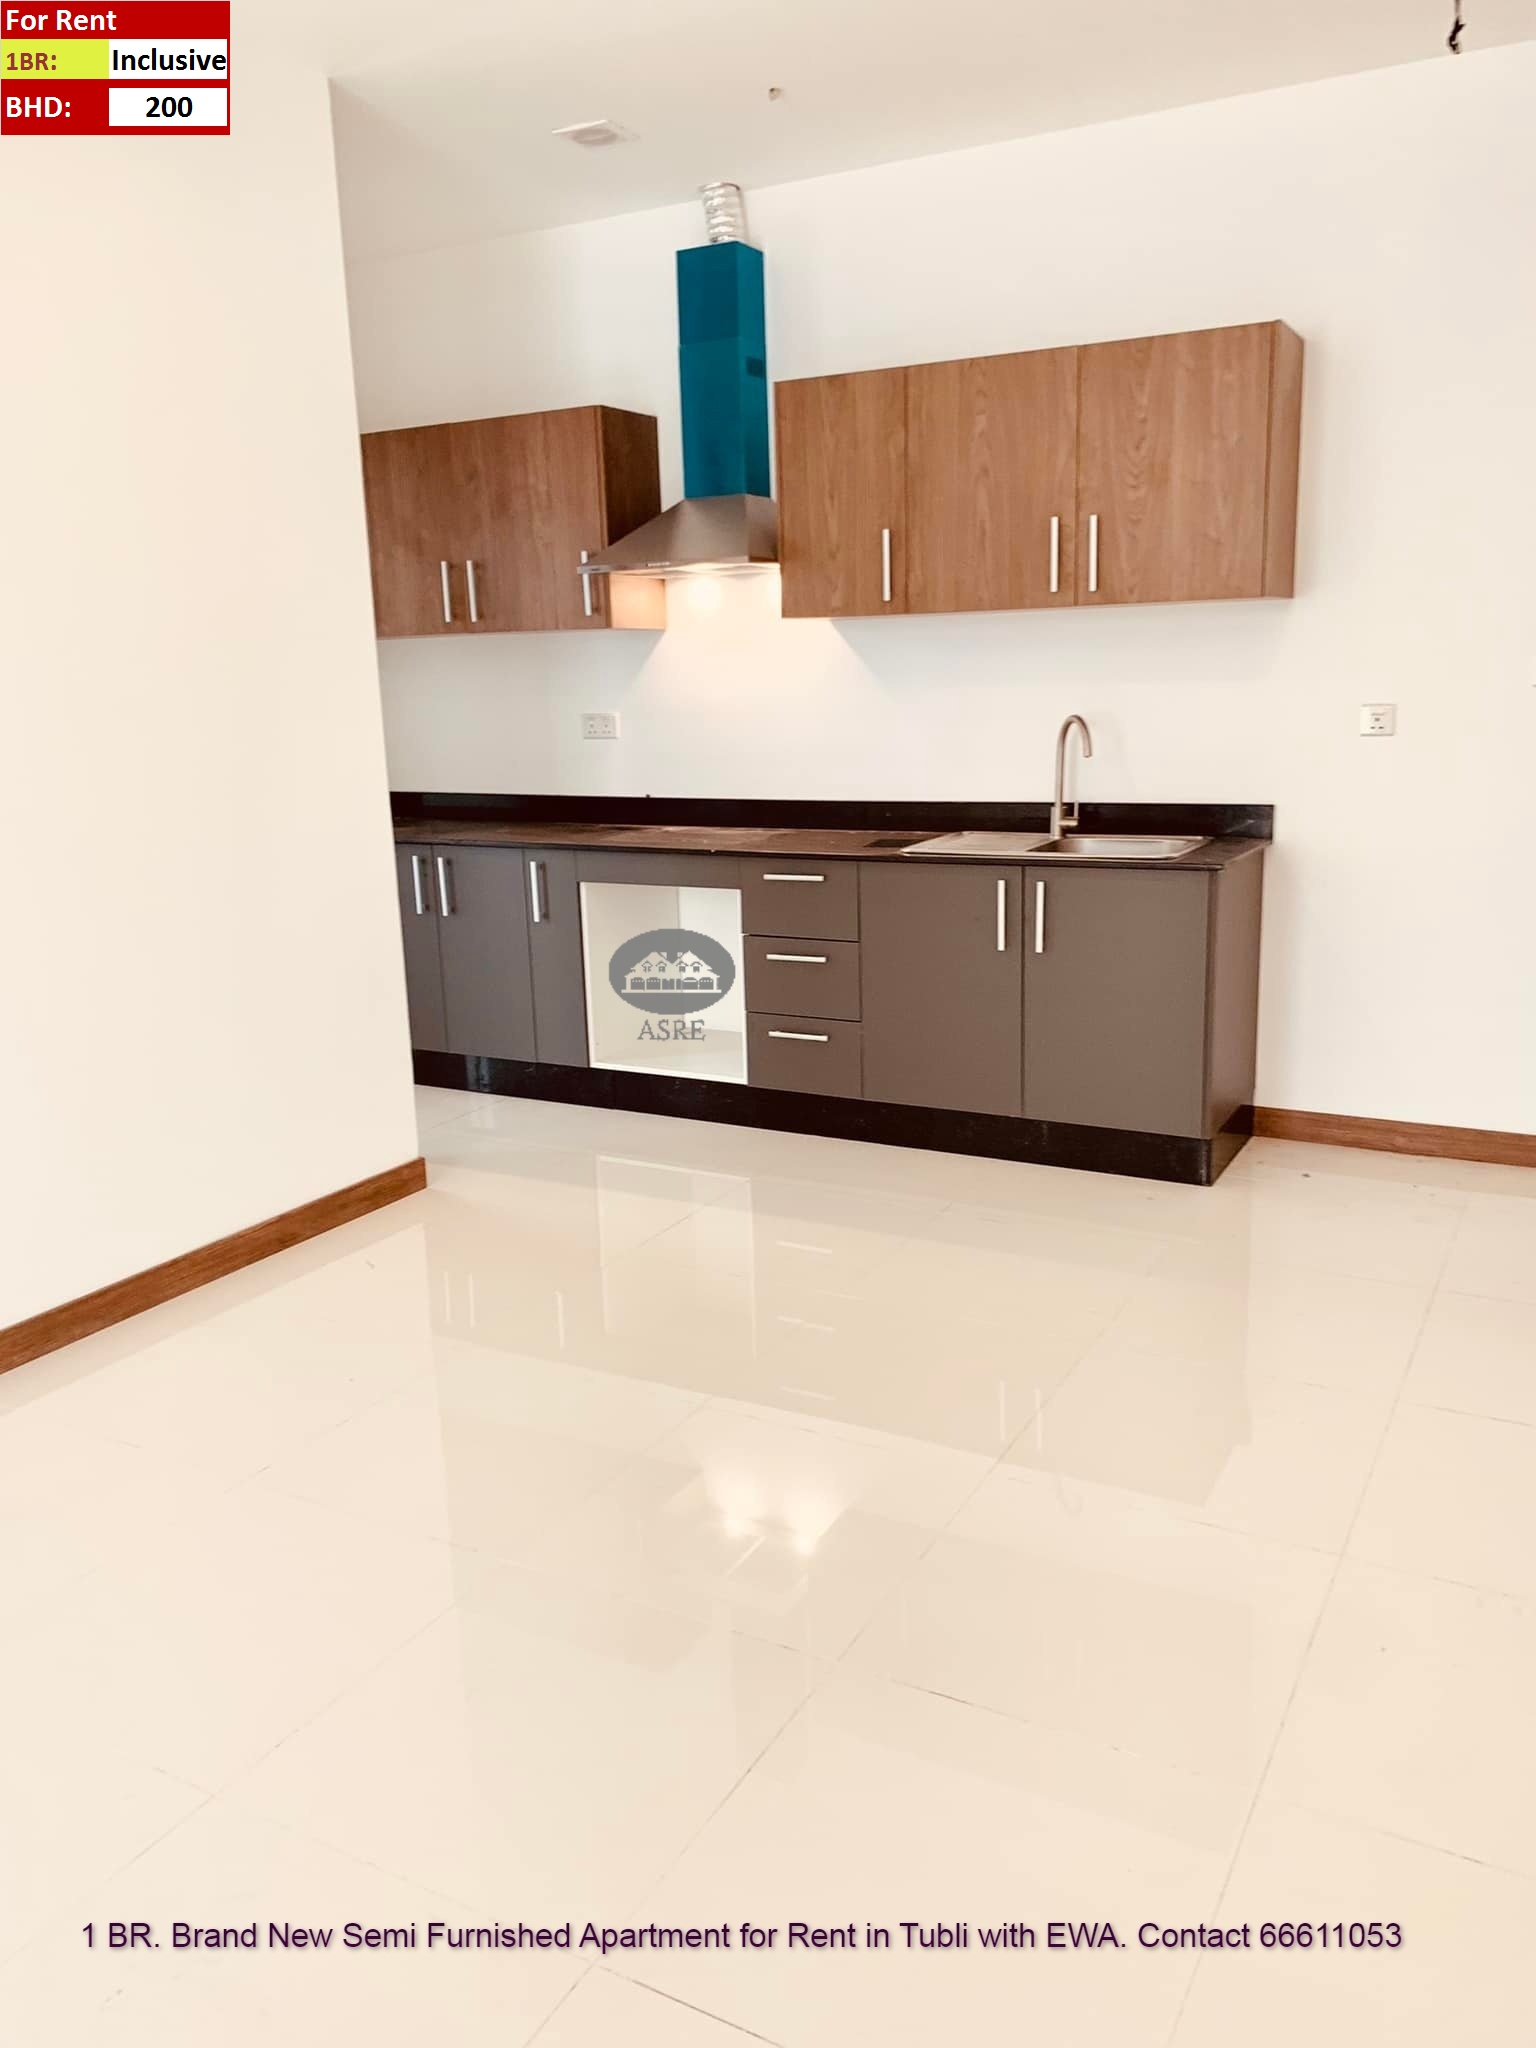 1 BR. New Semi Furnished Apartment for Rent in Tubli with EWA.